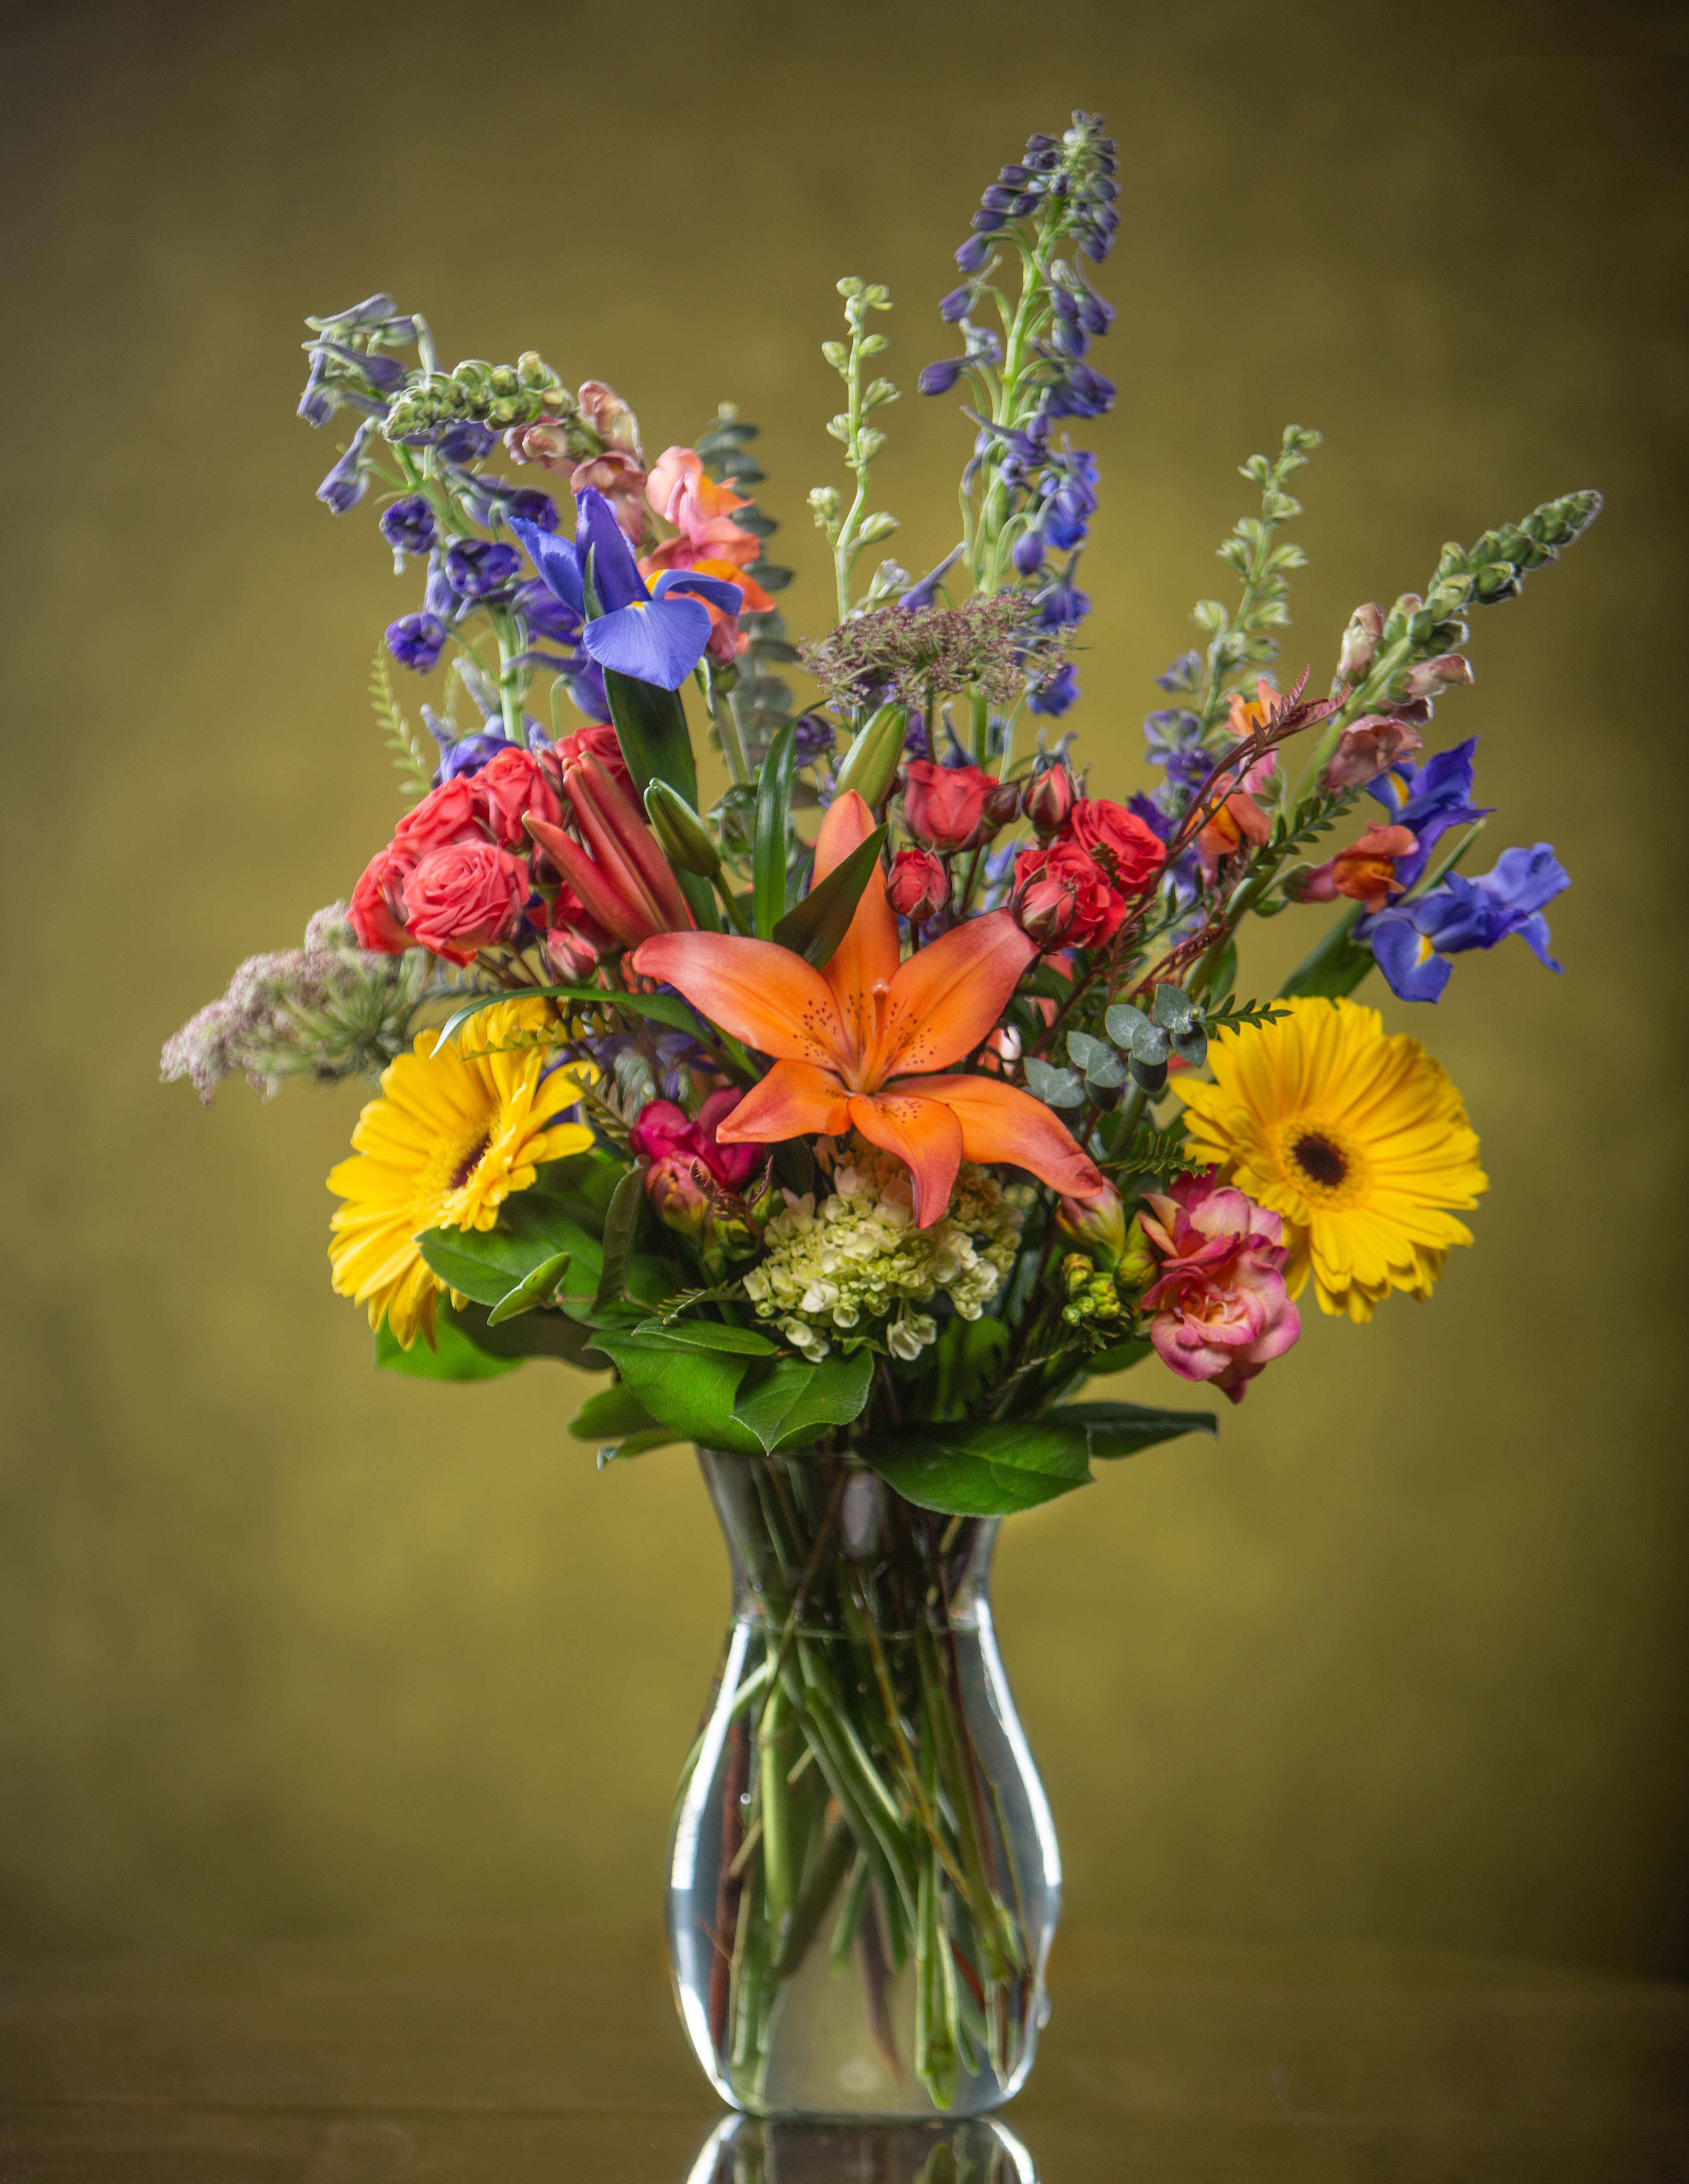 Lush Garden - A sophisticated, refreshing blend of spring flowers including Hydrangea, Freesia, Dutch Iris, Belladonna, Asiatic Lillies, Gerbera Daisies, and Snap Dragons. Designed in a vase and delivered by us, a real Portland florist to anywhere in the greater Portland Oregon area. Place your order online, or call us directly 503 223 1646